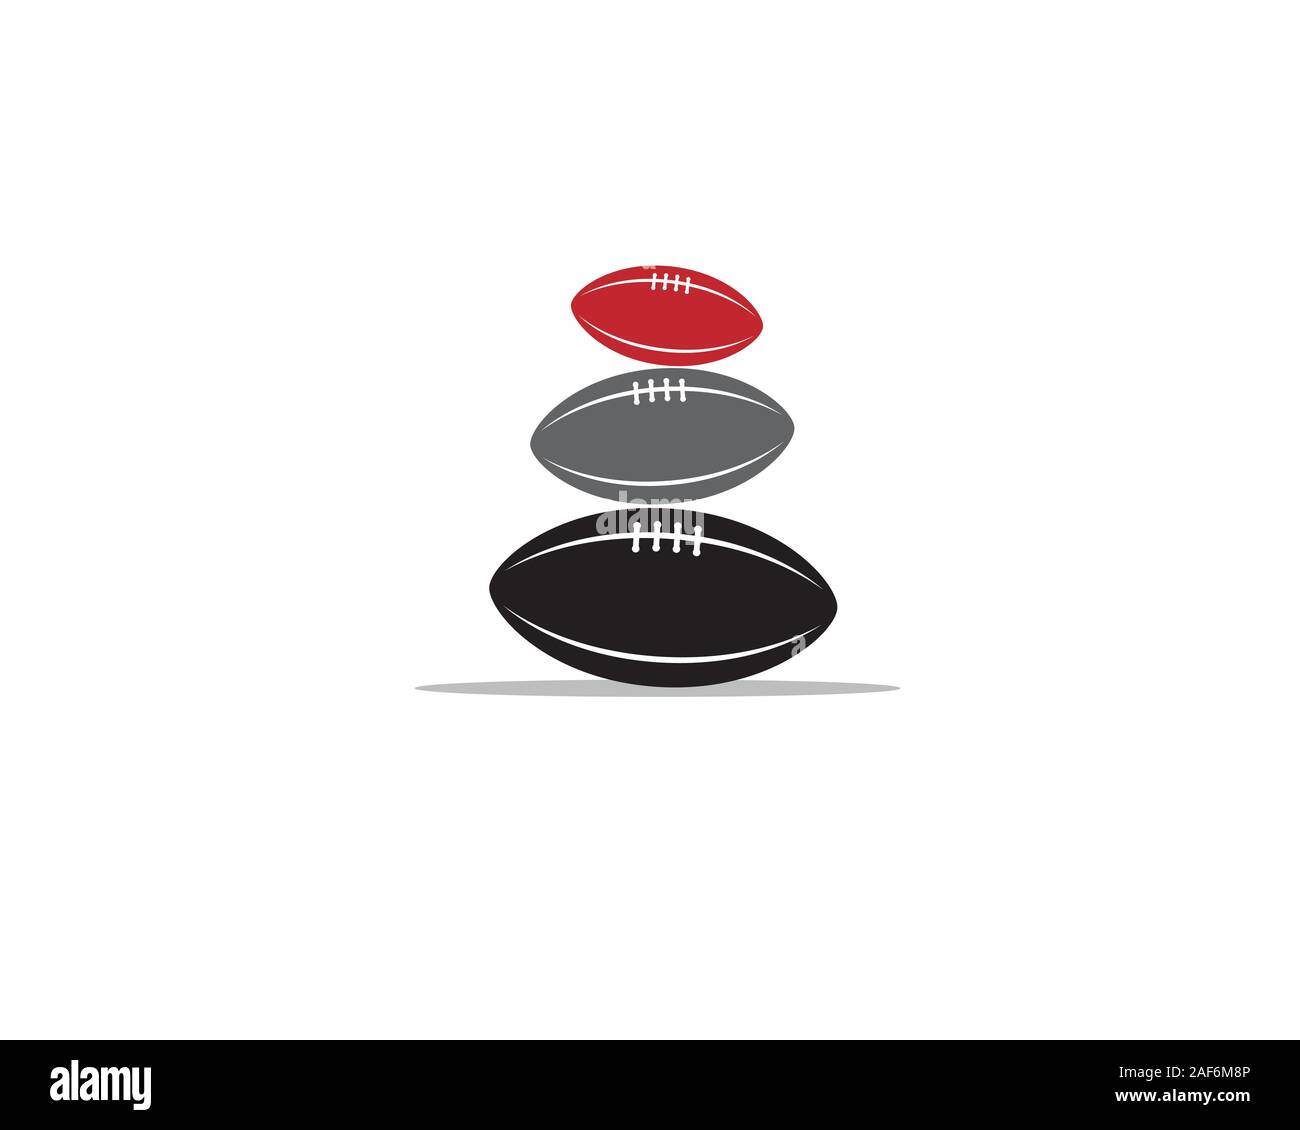 rugby ball vertically stacked as zen rocks Stock Vector